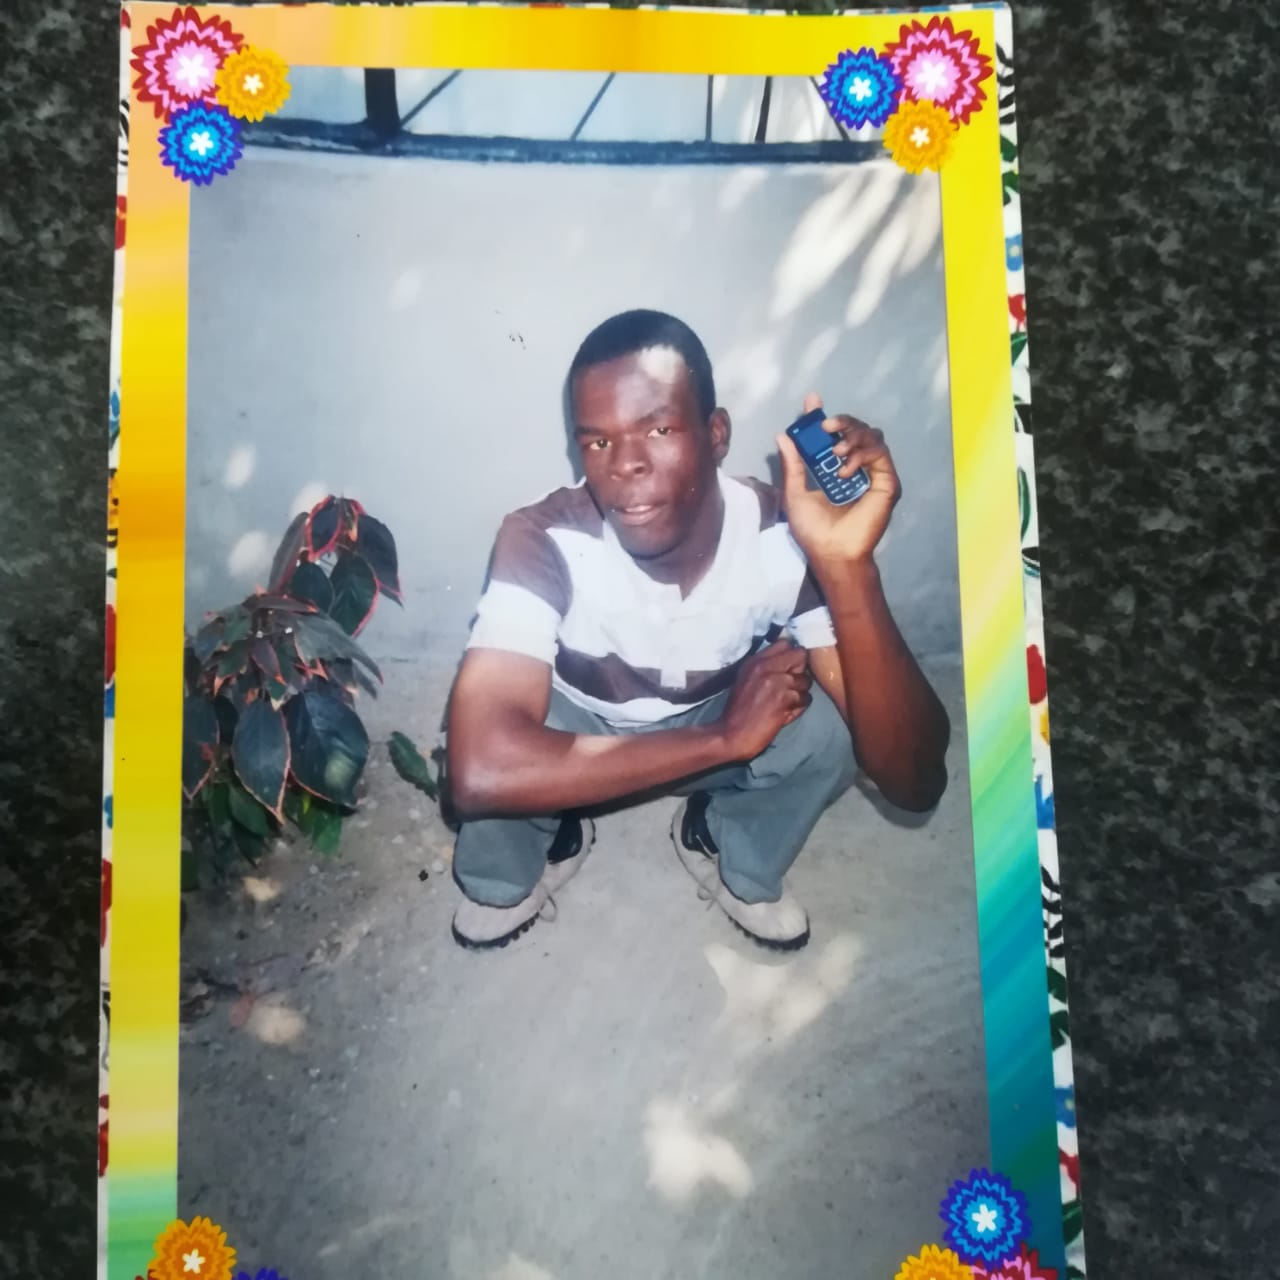 MANHUNT LAUNCHED IN TZANEEN FOR A MISSING PERSON